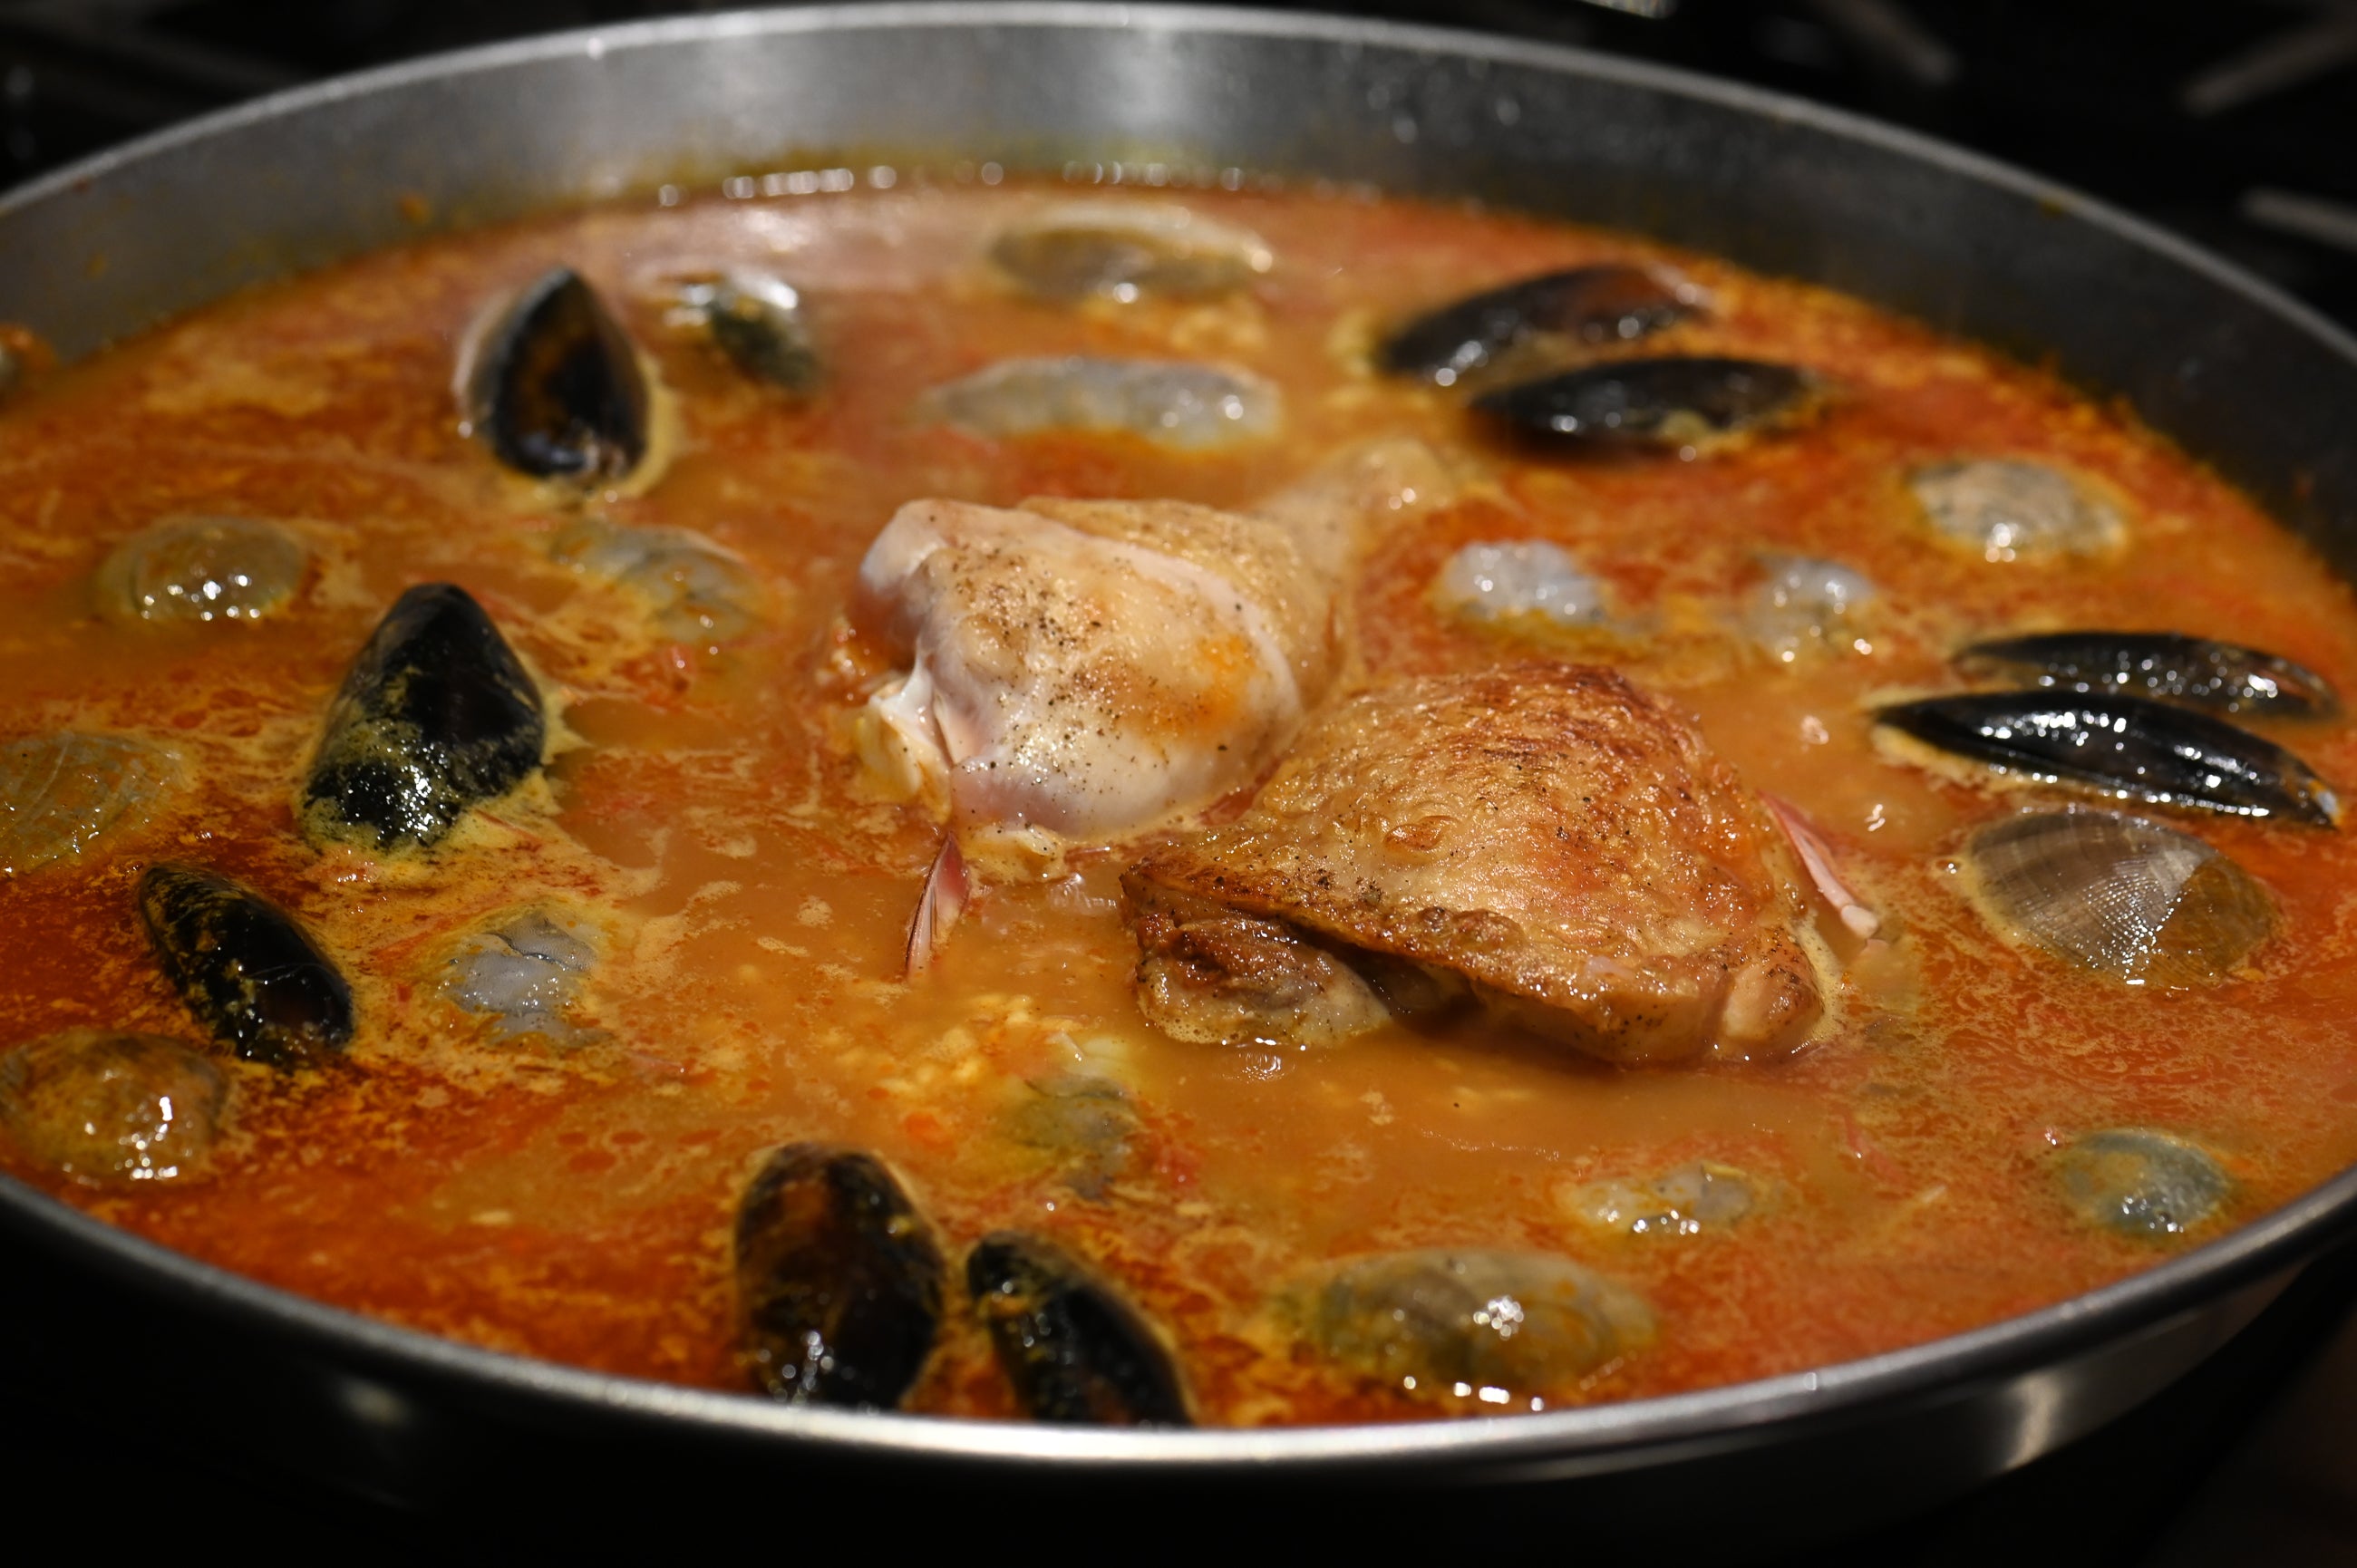 adding clams mussels shrimp to the paella pan